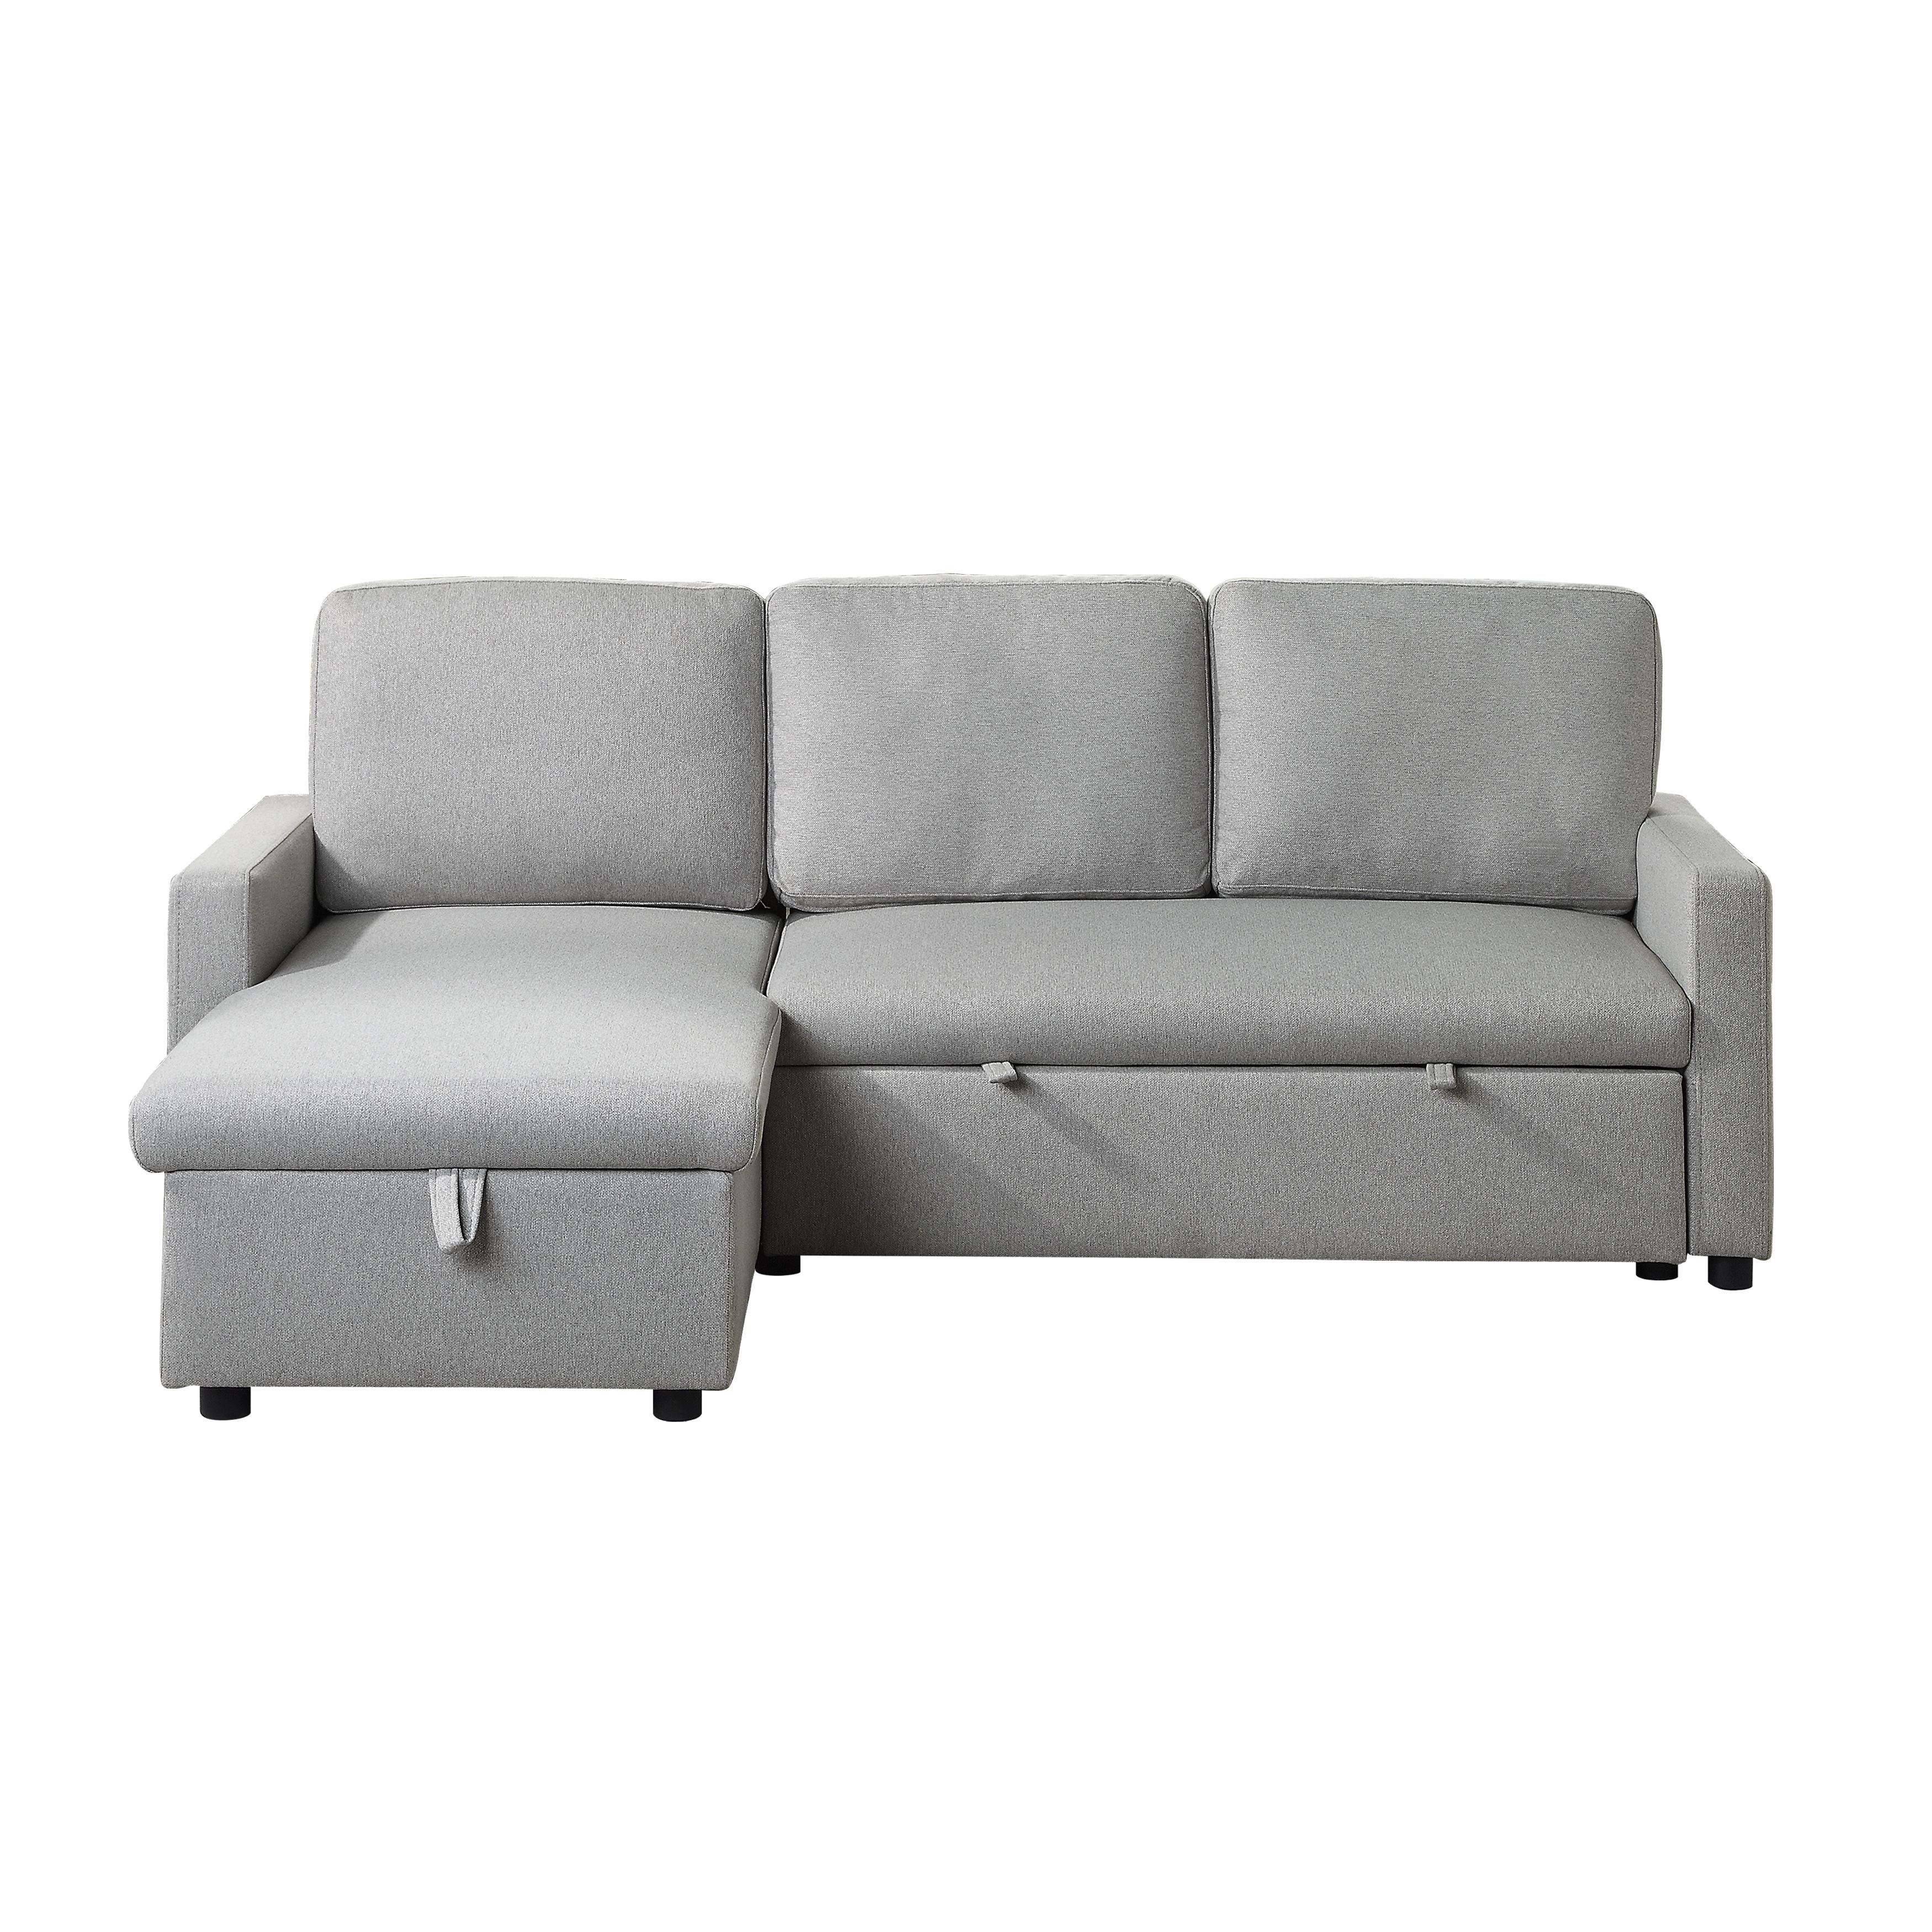 Transitional Sectional 9359GRY*SC Brandolyn 9359GRY*SC in Light Gray 